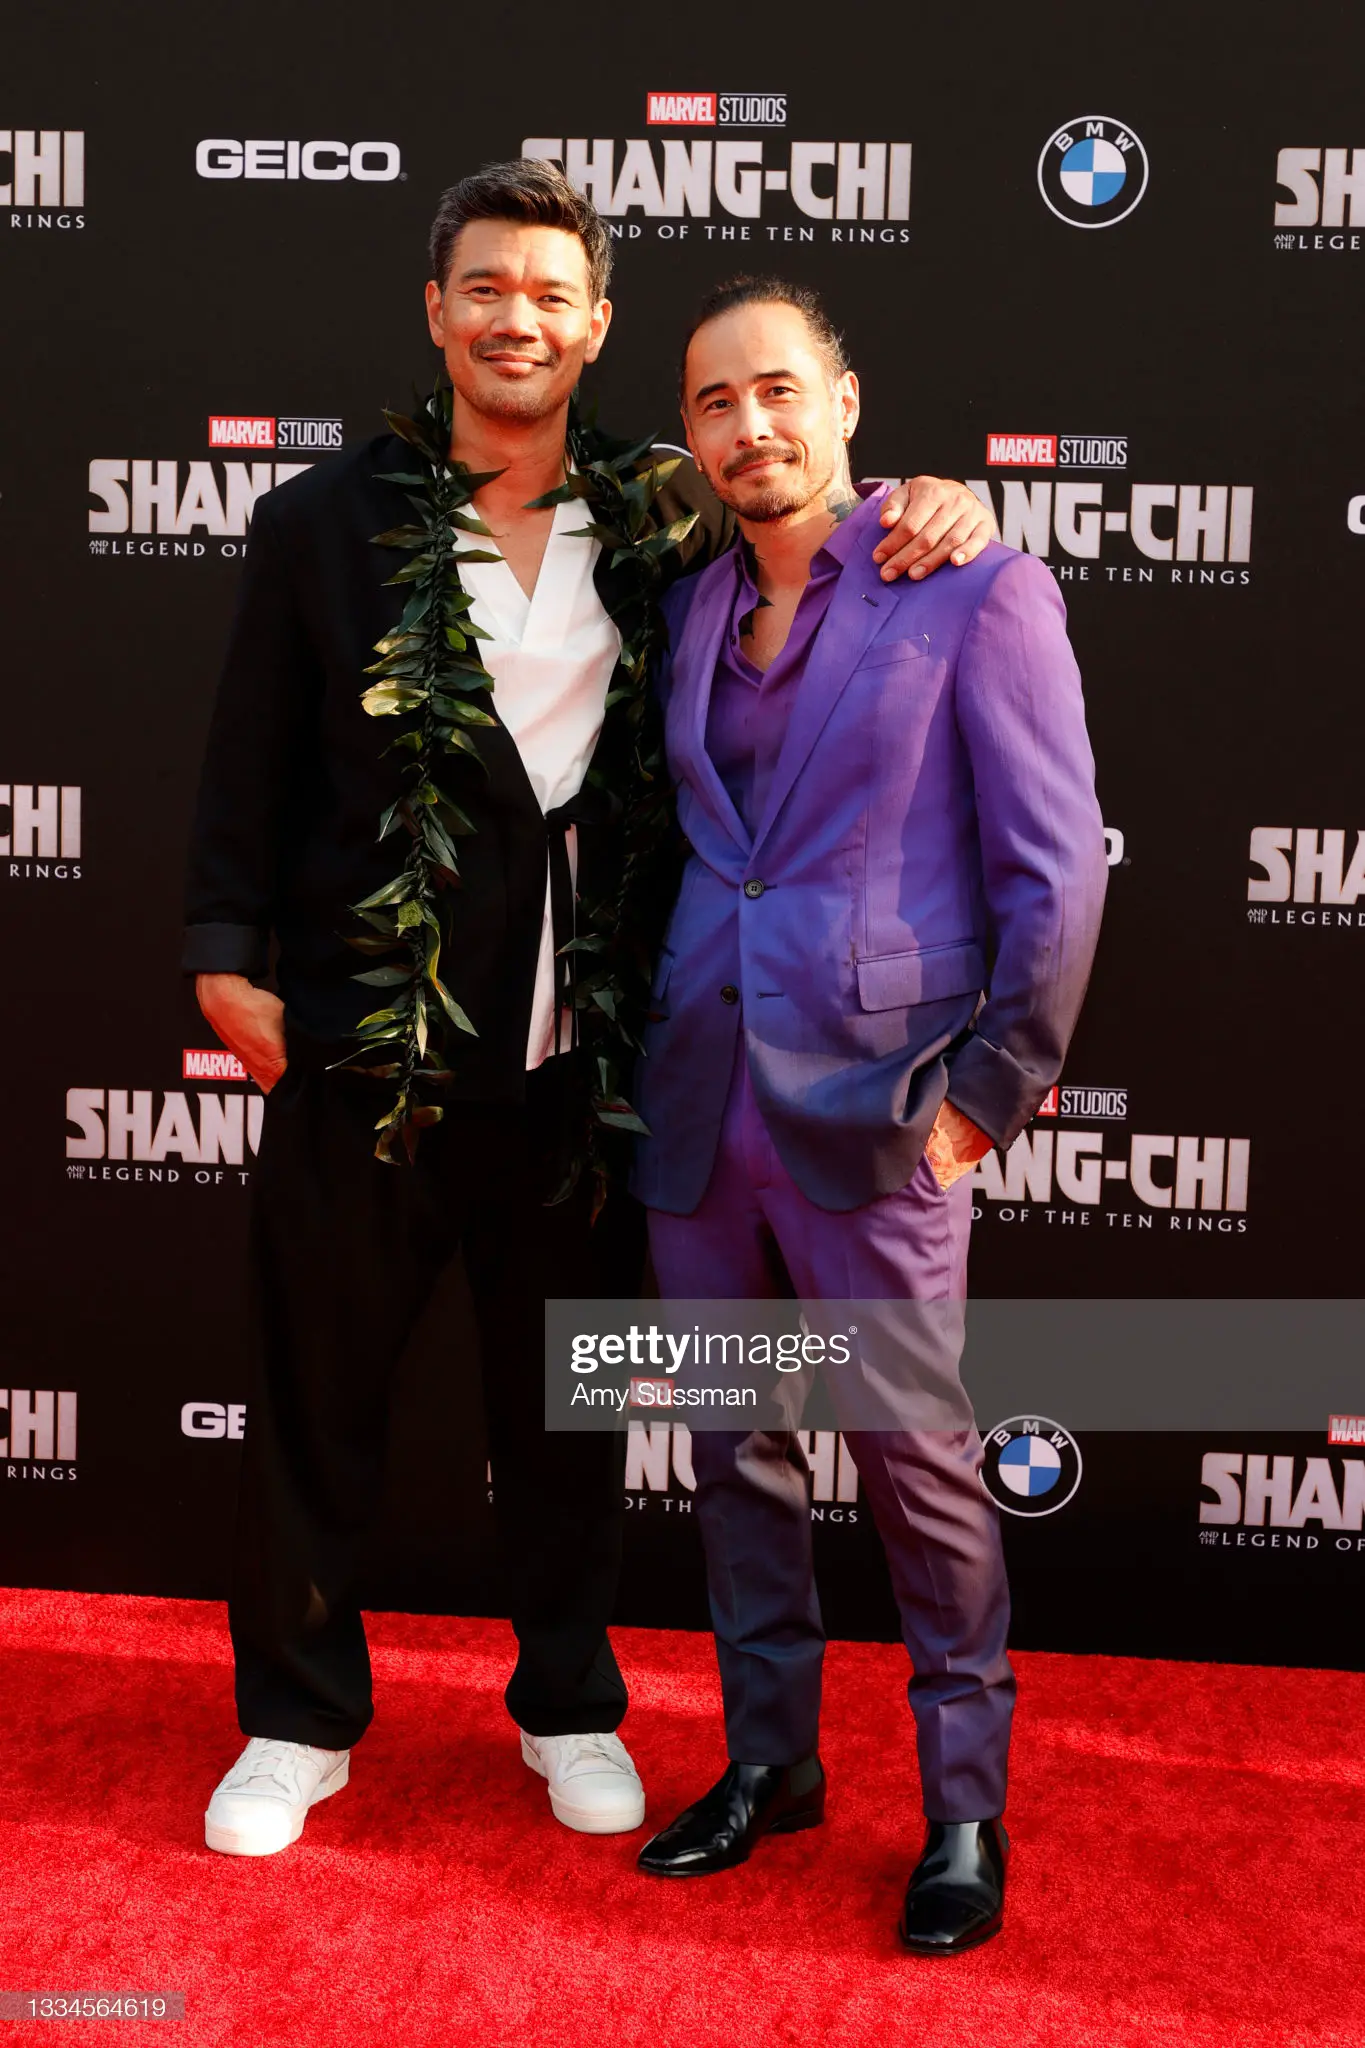 Destin Daniel Cretton and Dave Callaham attend Disney's premiere of "Shang-Chi And The Legend Of The Ten Rings" at El Capitan Theatre